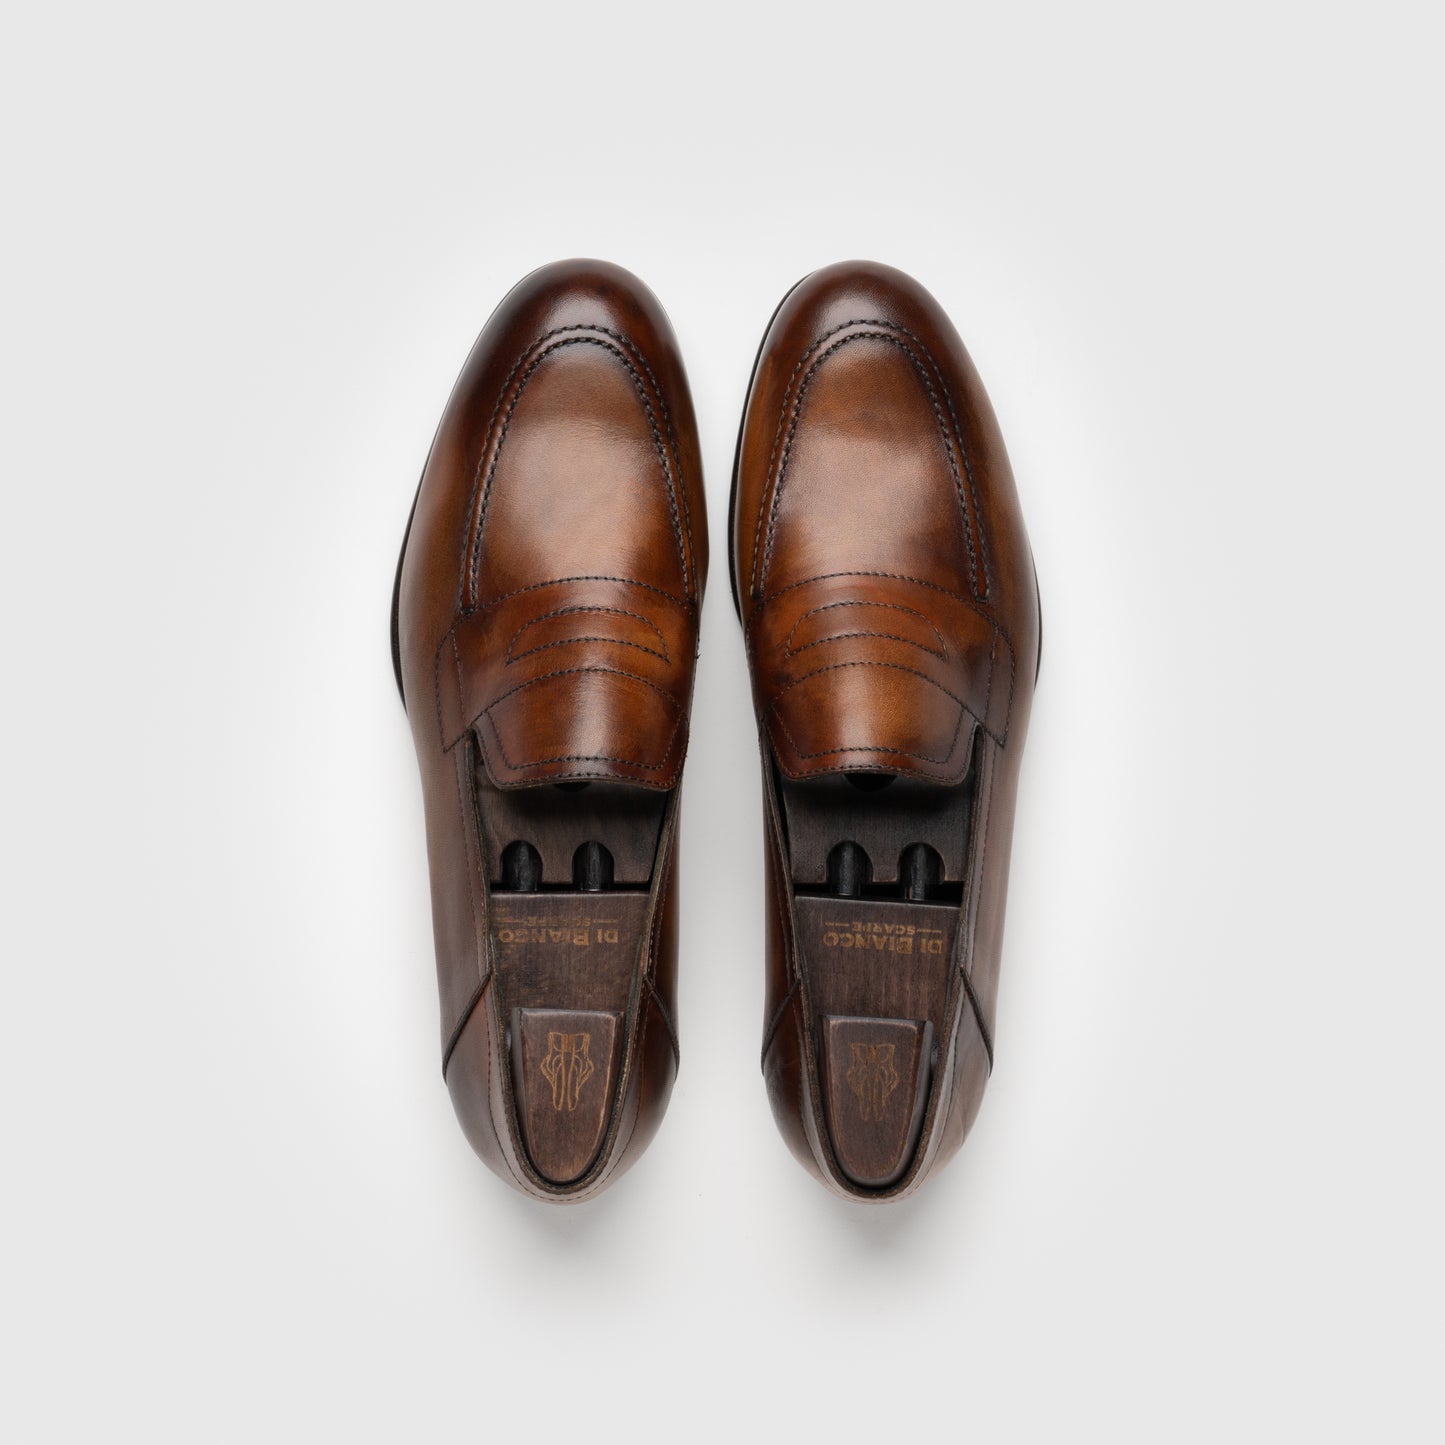 Nerano Cacao Men's Loafer